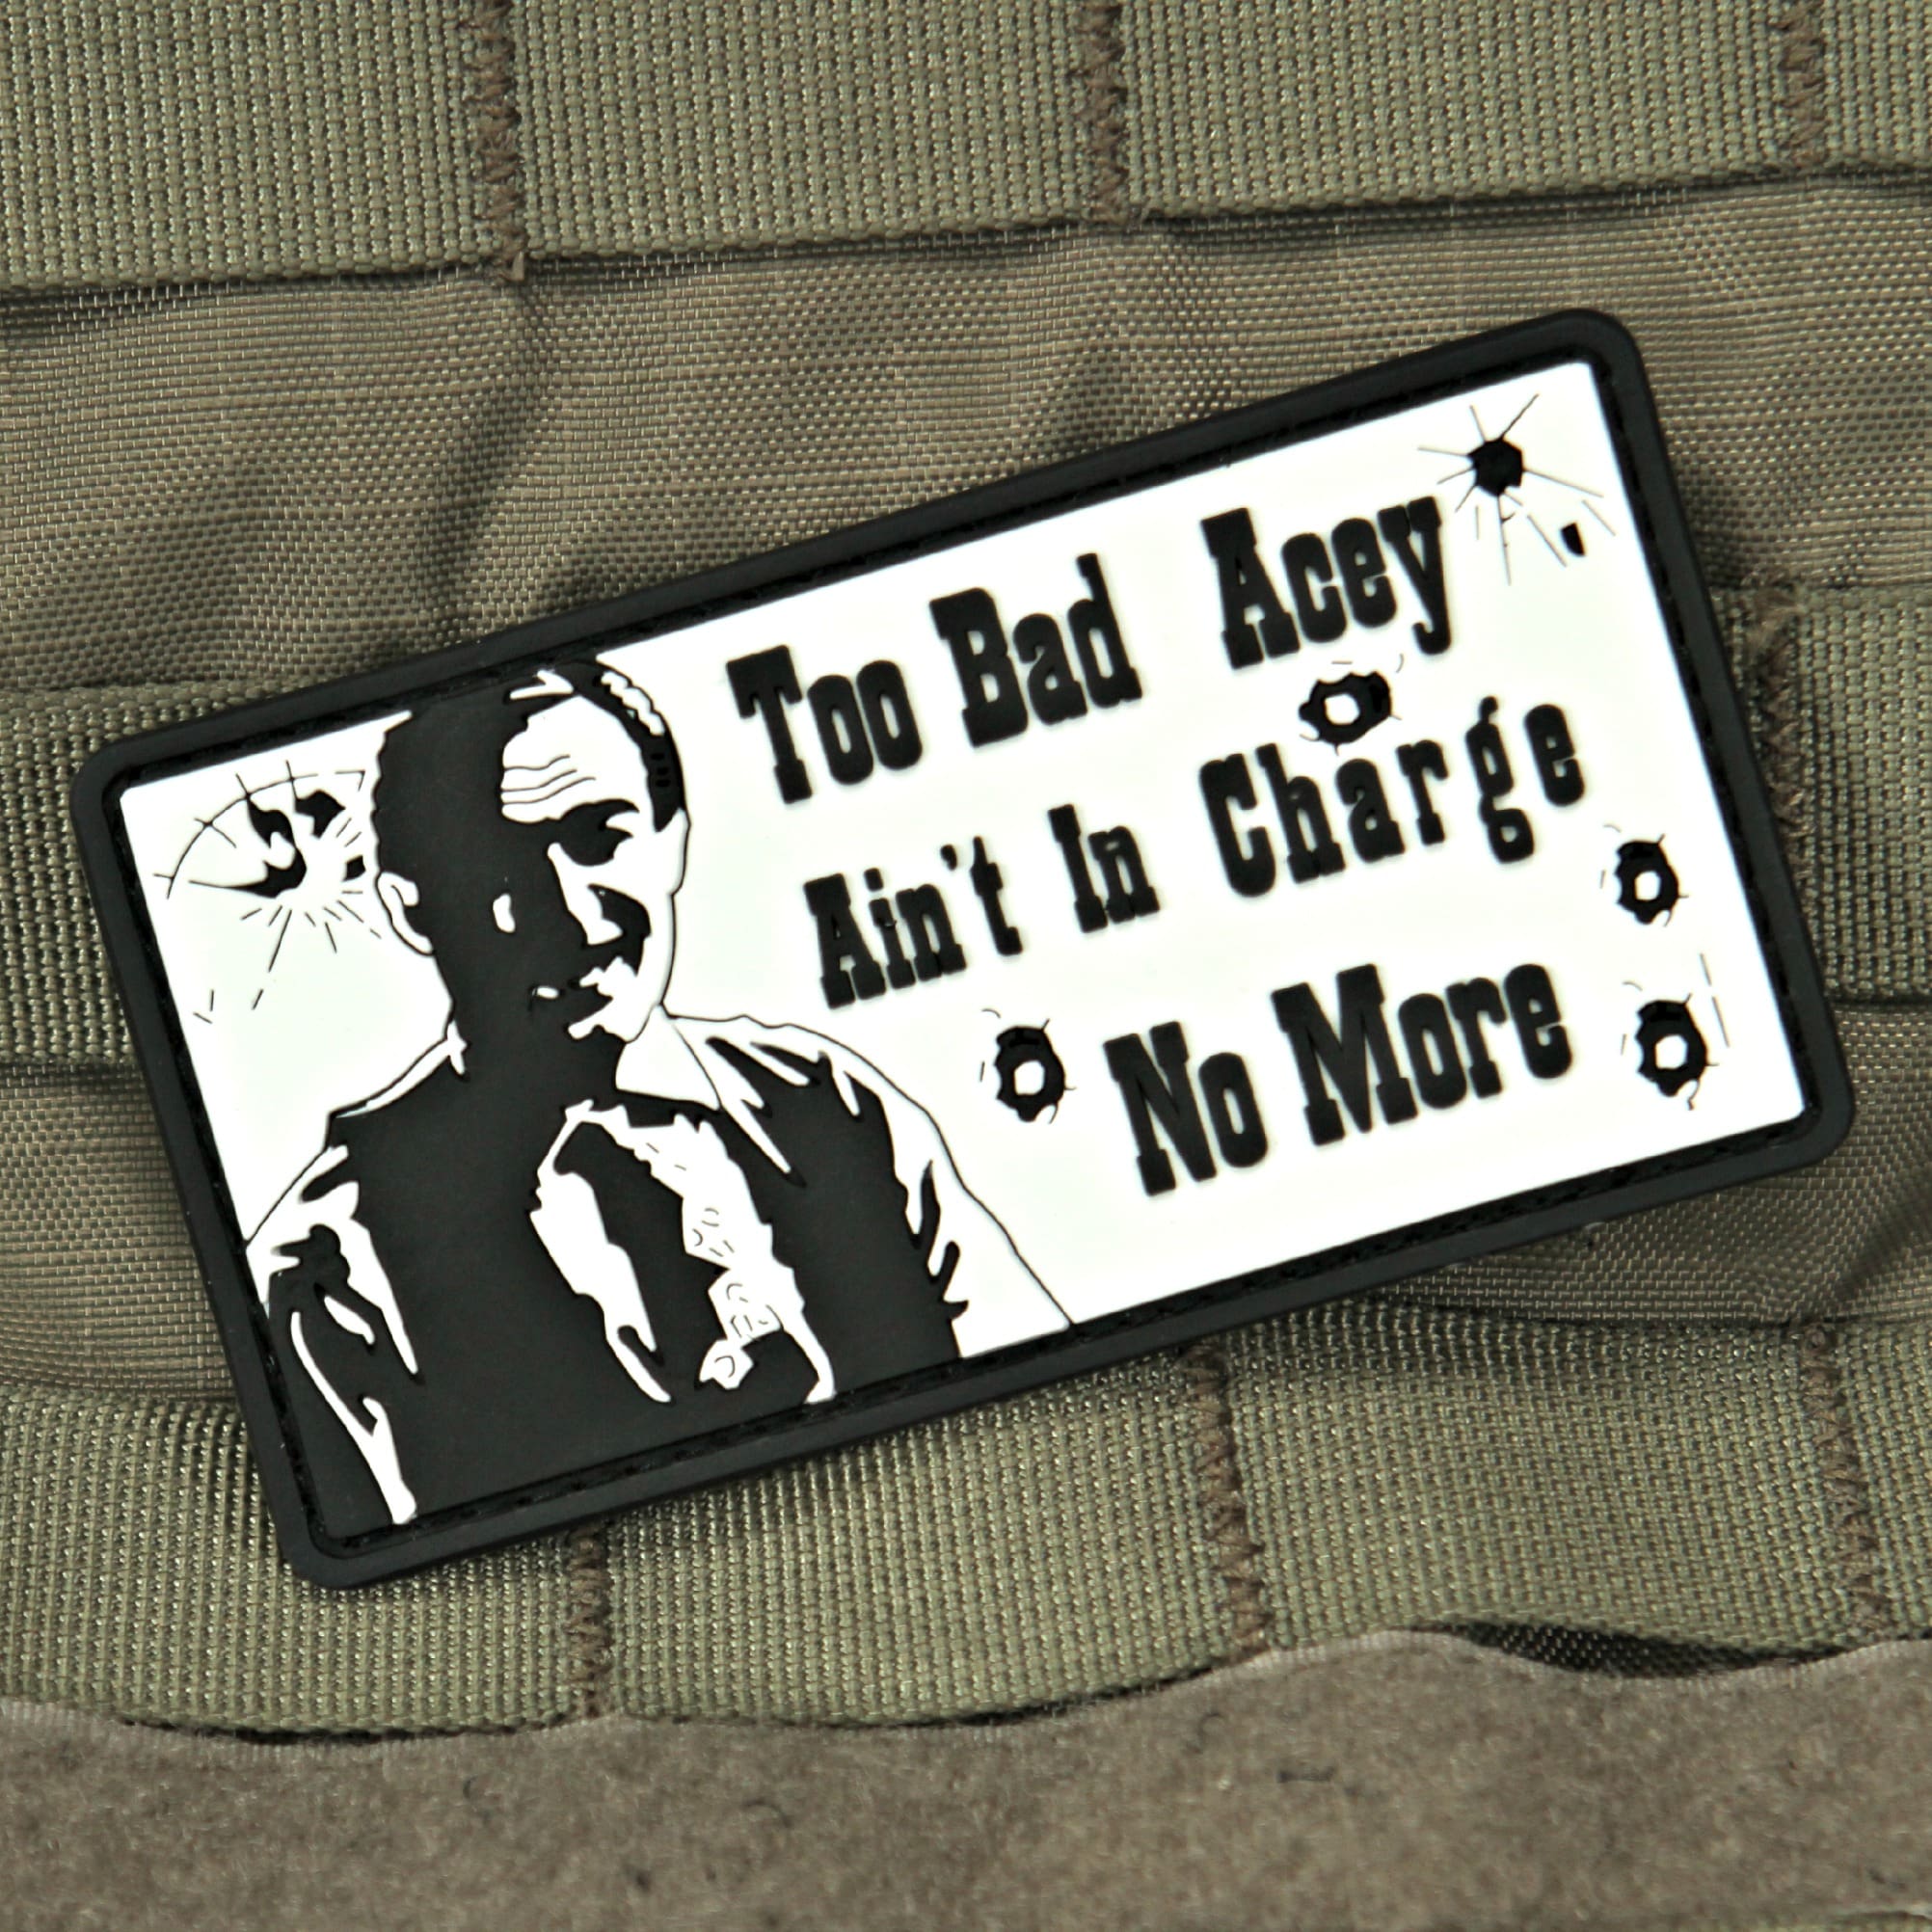 Morale's. Morale Patch 6600. Too much Patch. Джонни патч идея. Bad morale.